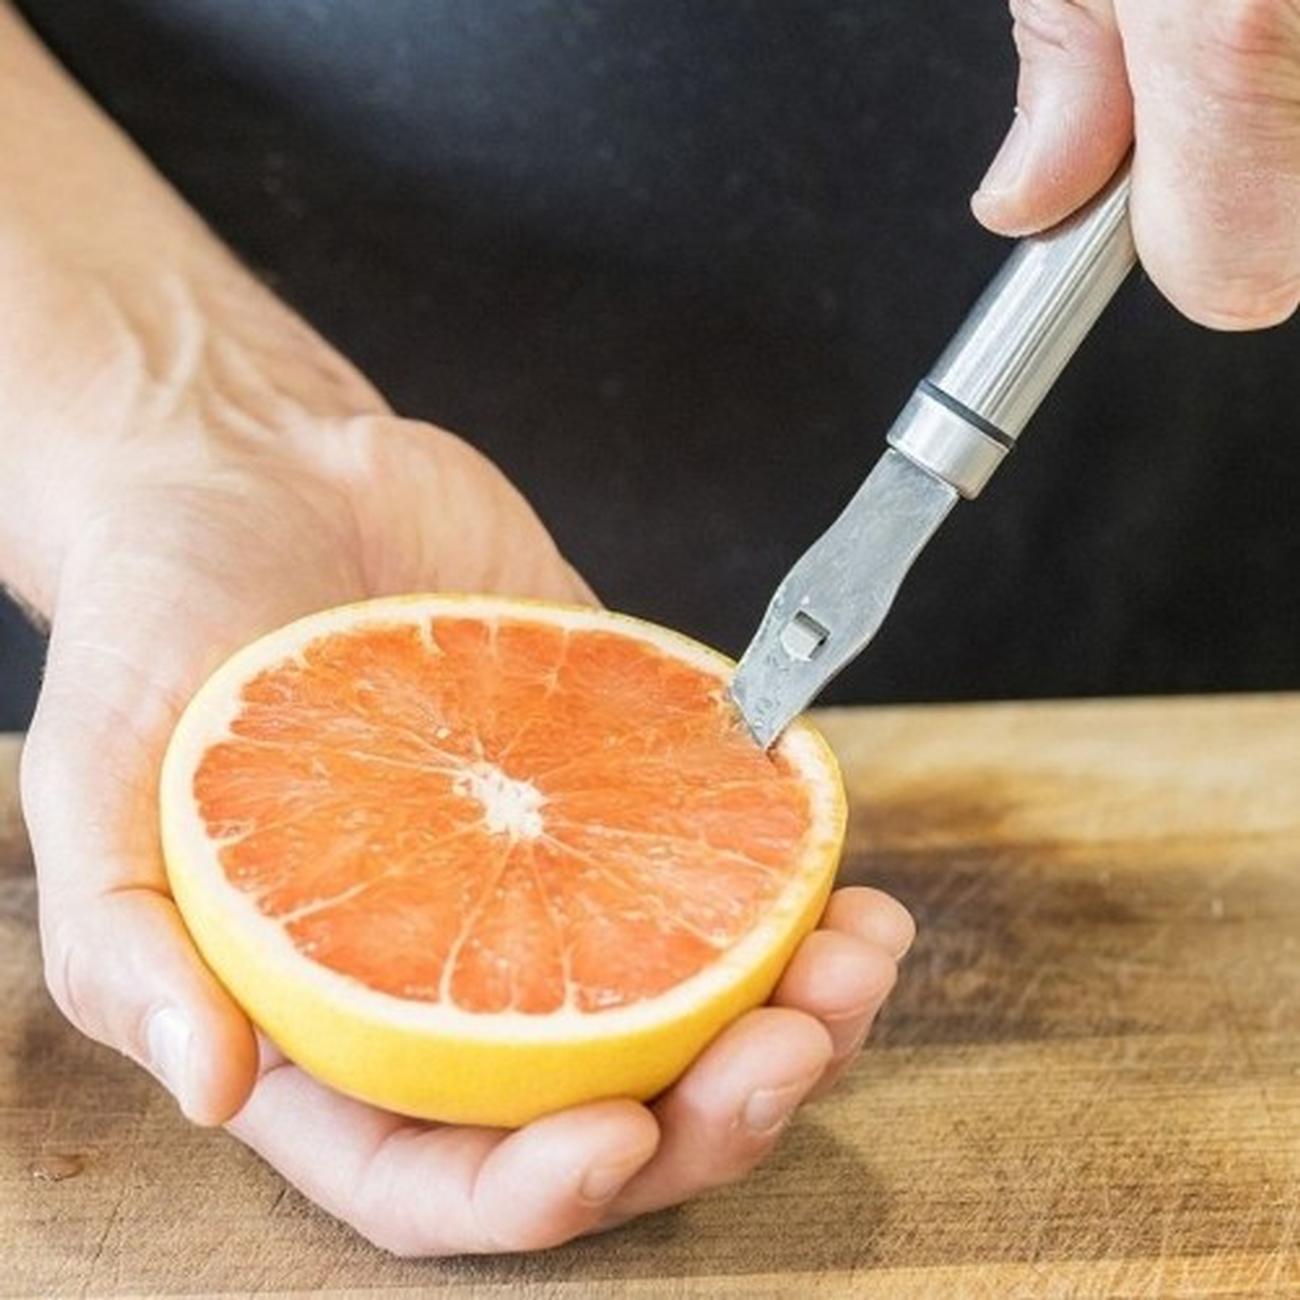 2 Grapefruit Knives Stainless Steel Dual Serrated Edge Blade Knife